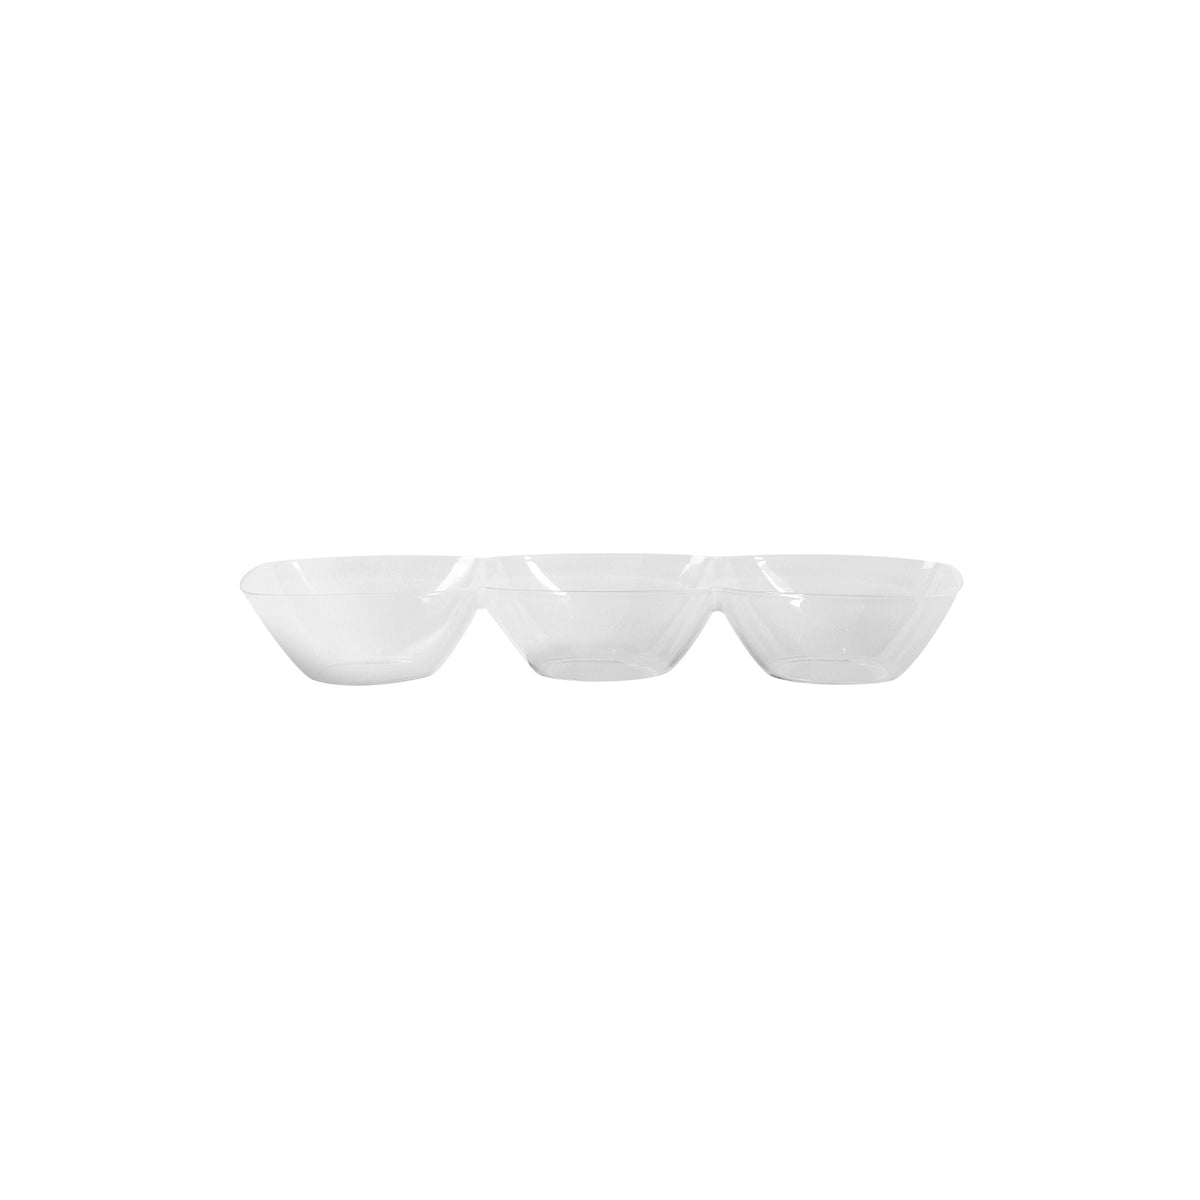 MADISON IMPORTS Disposable-Plasticware Premium Quality Clear Bowl Tray, 6 Count 775310477889